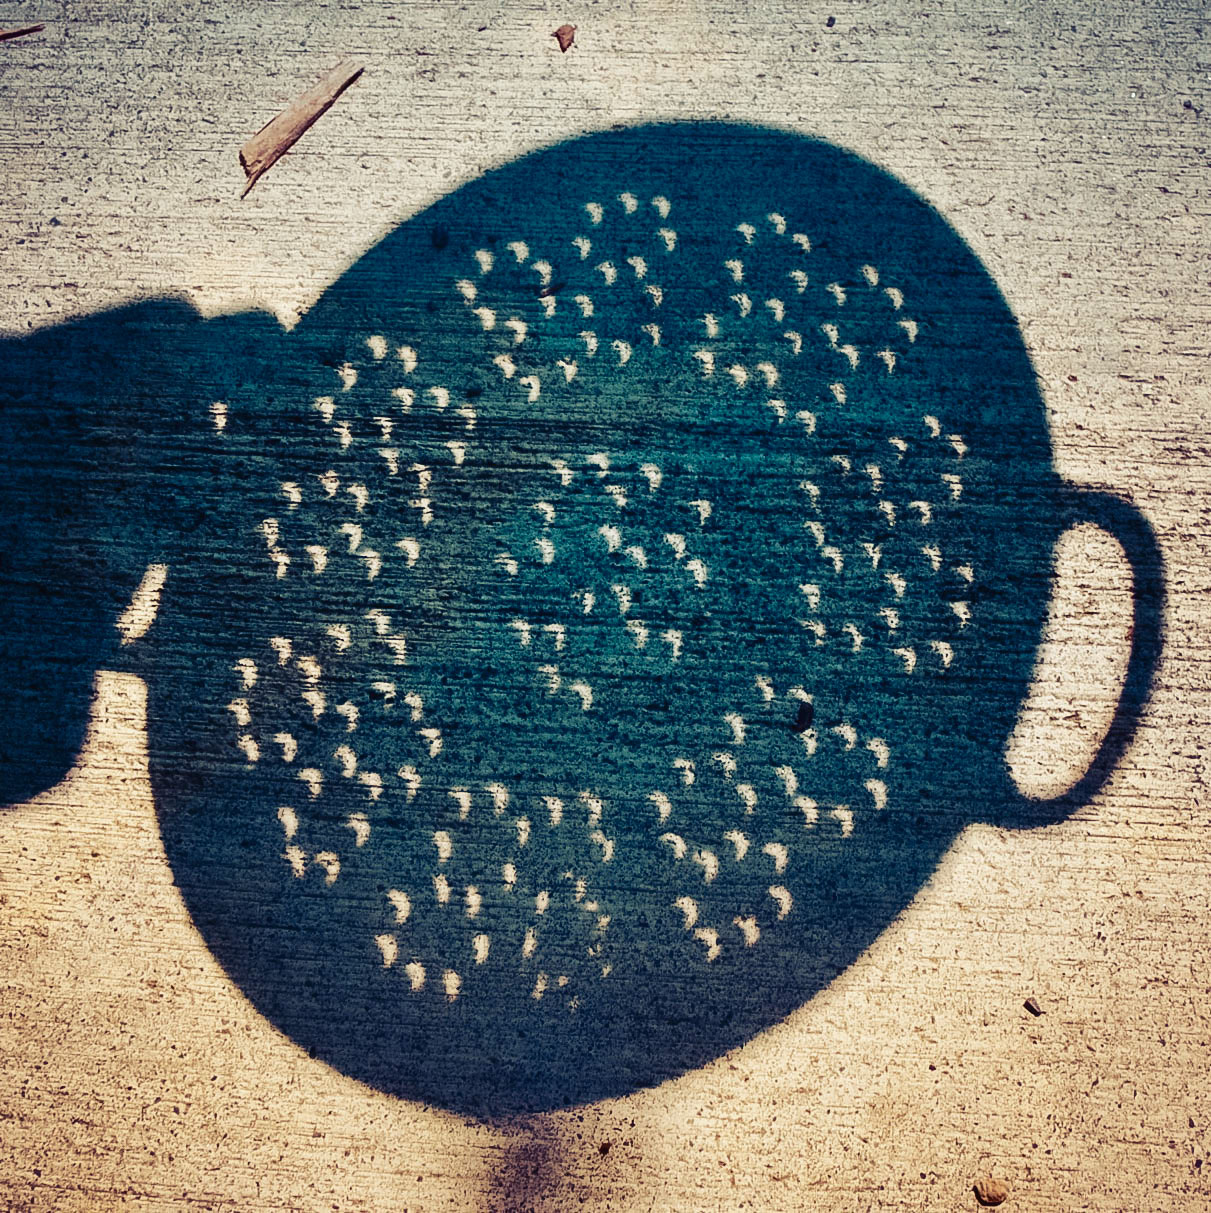 The view of an eclipse through the shadow of a colander